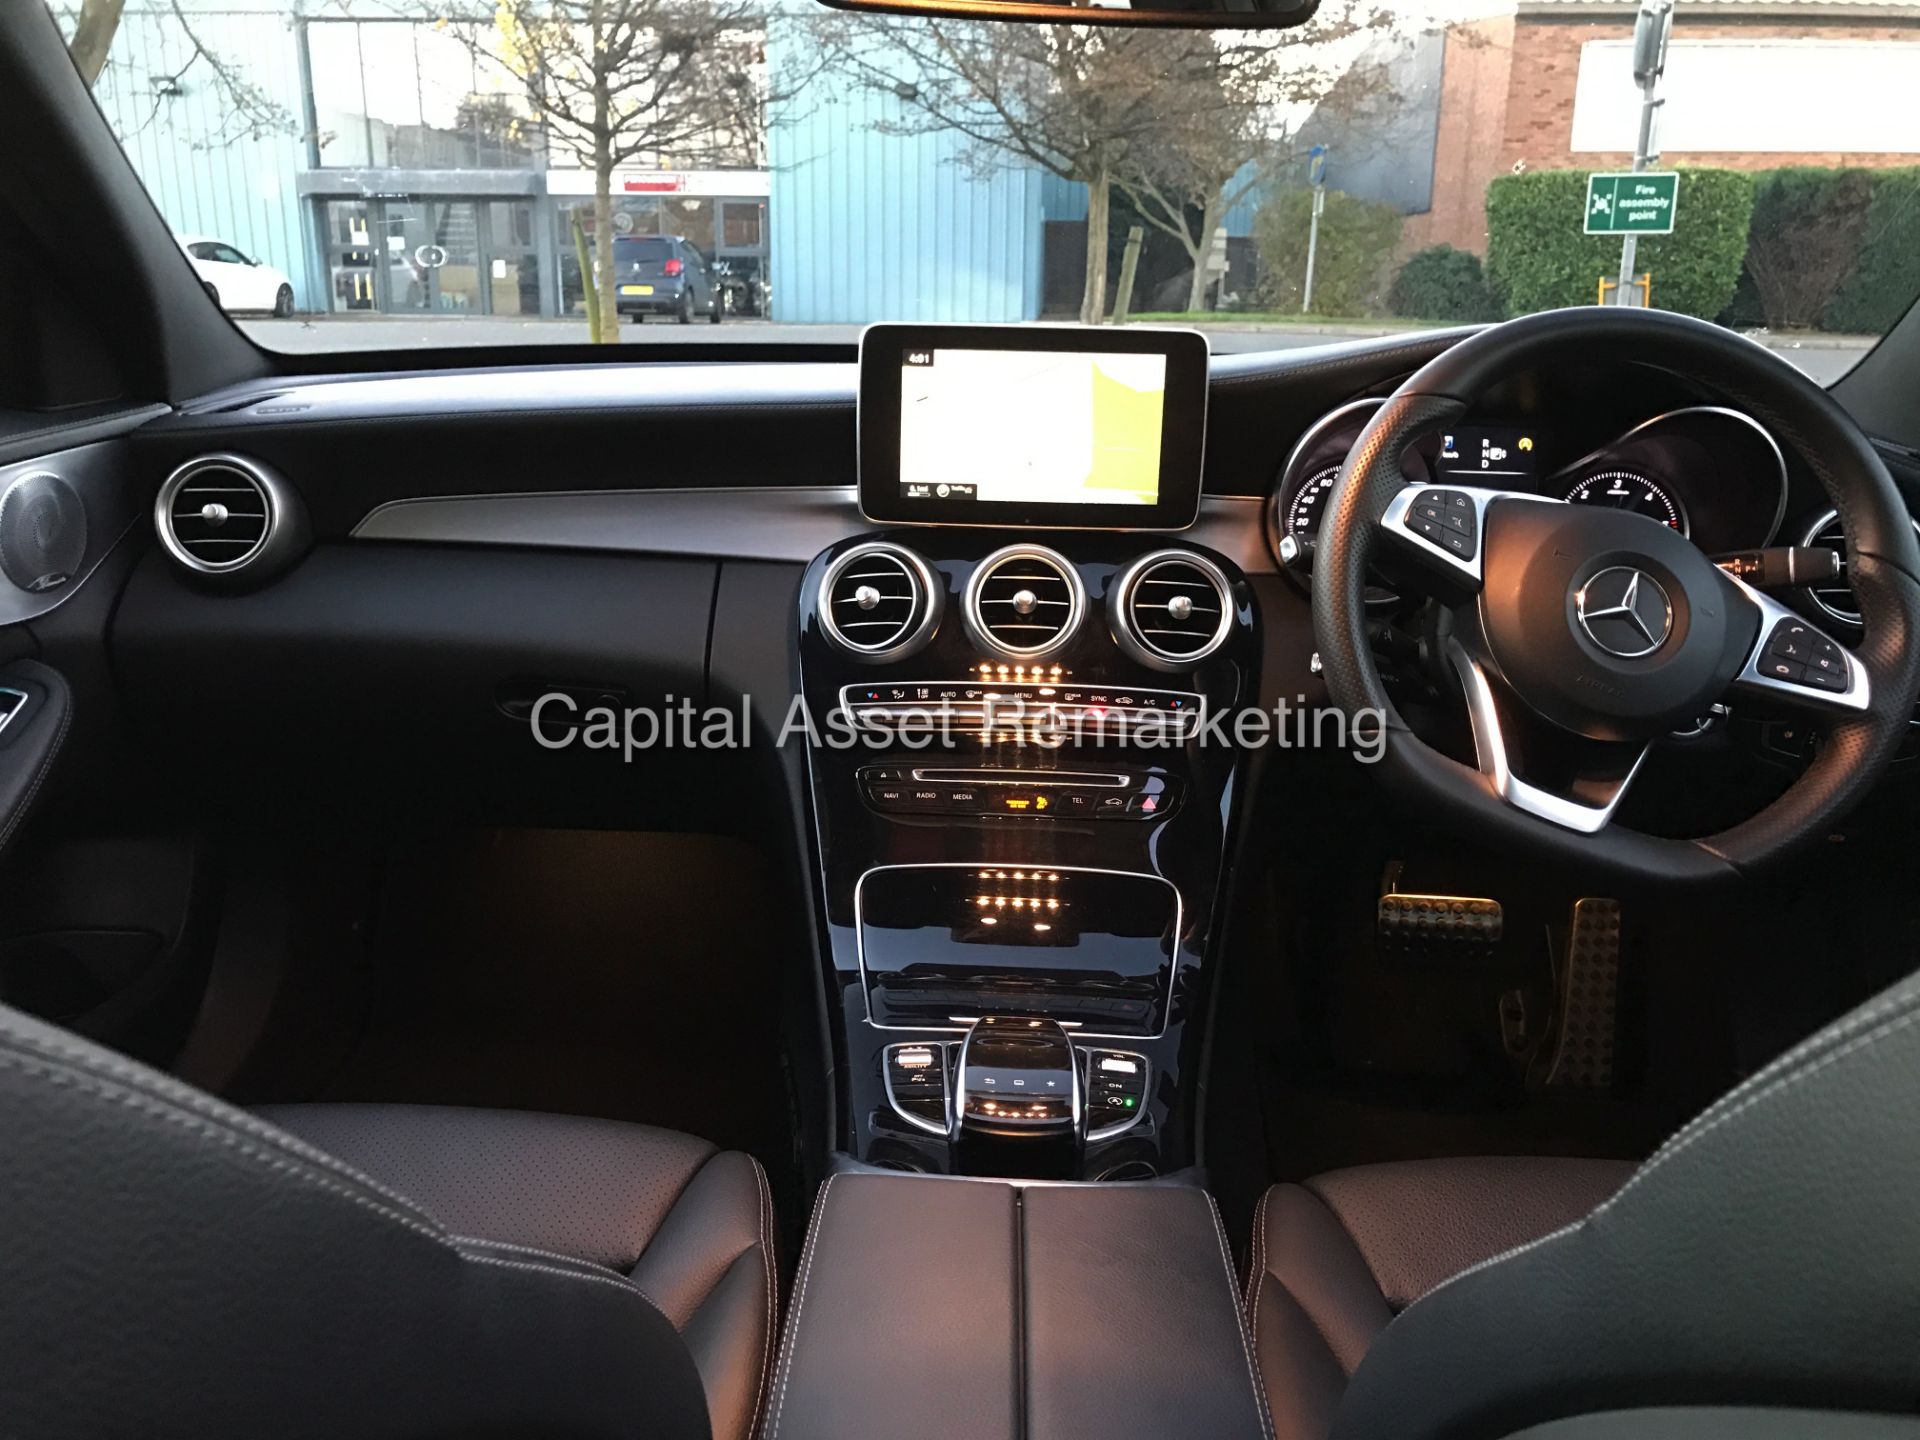 ON SALE MERCEDES C220CDI "PREMIUM PLUS" 7G TRONIC (2015 MODEL) PAN ROOF - COMMAND NAV - LEATHER - - Image 14 of 28